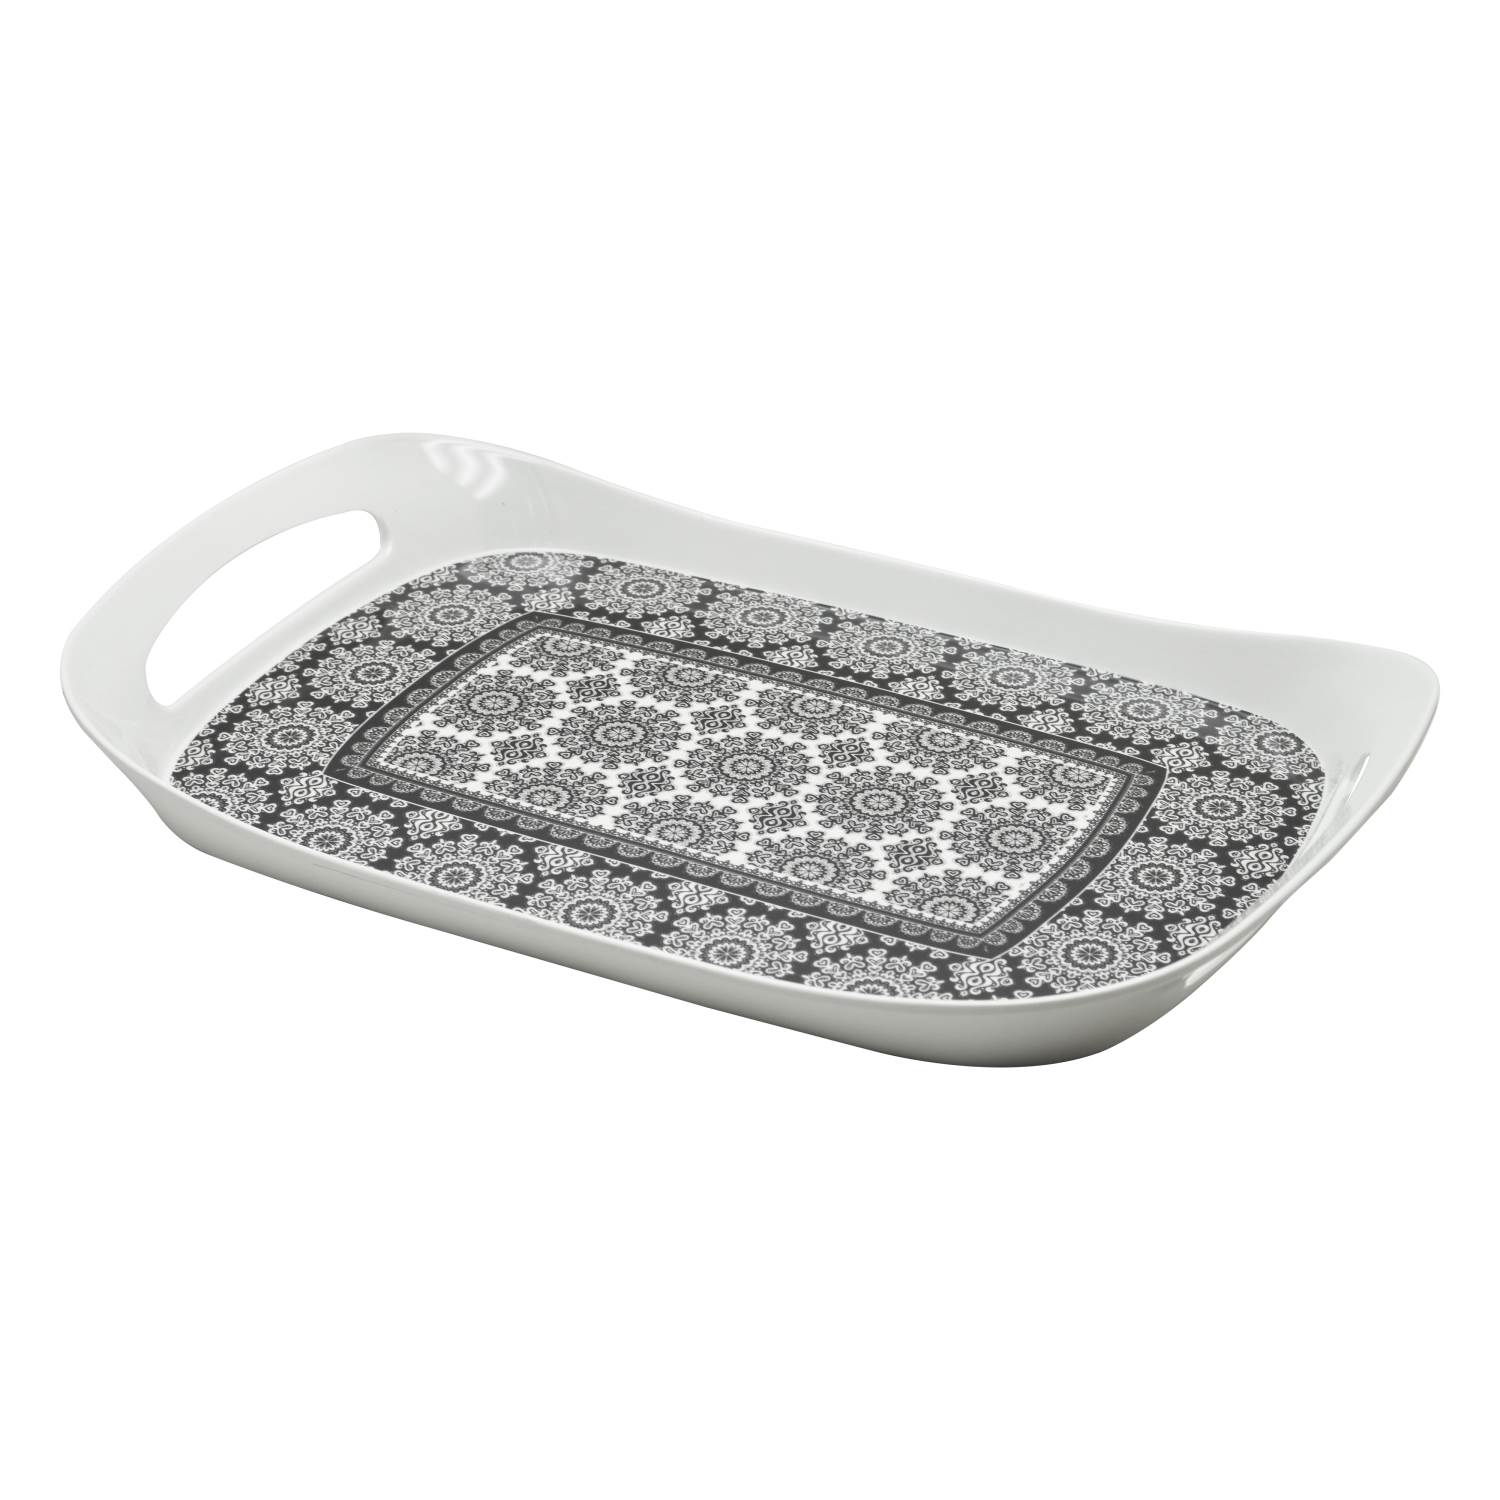 Rk Comfort Tray Large Black Abstract, Dwt1072Bab, 16.25" X 10.25"